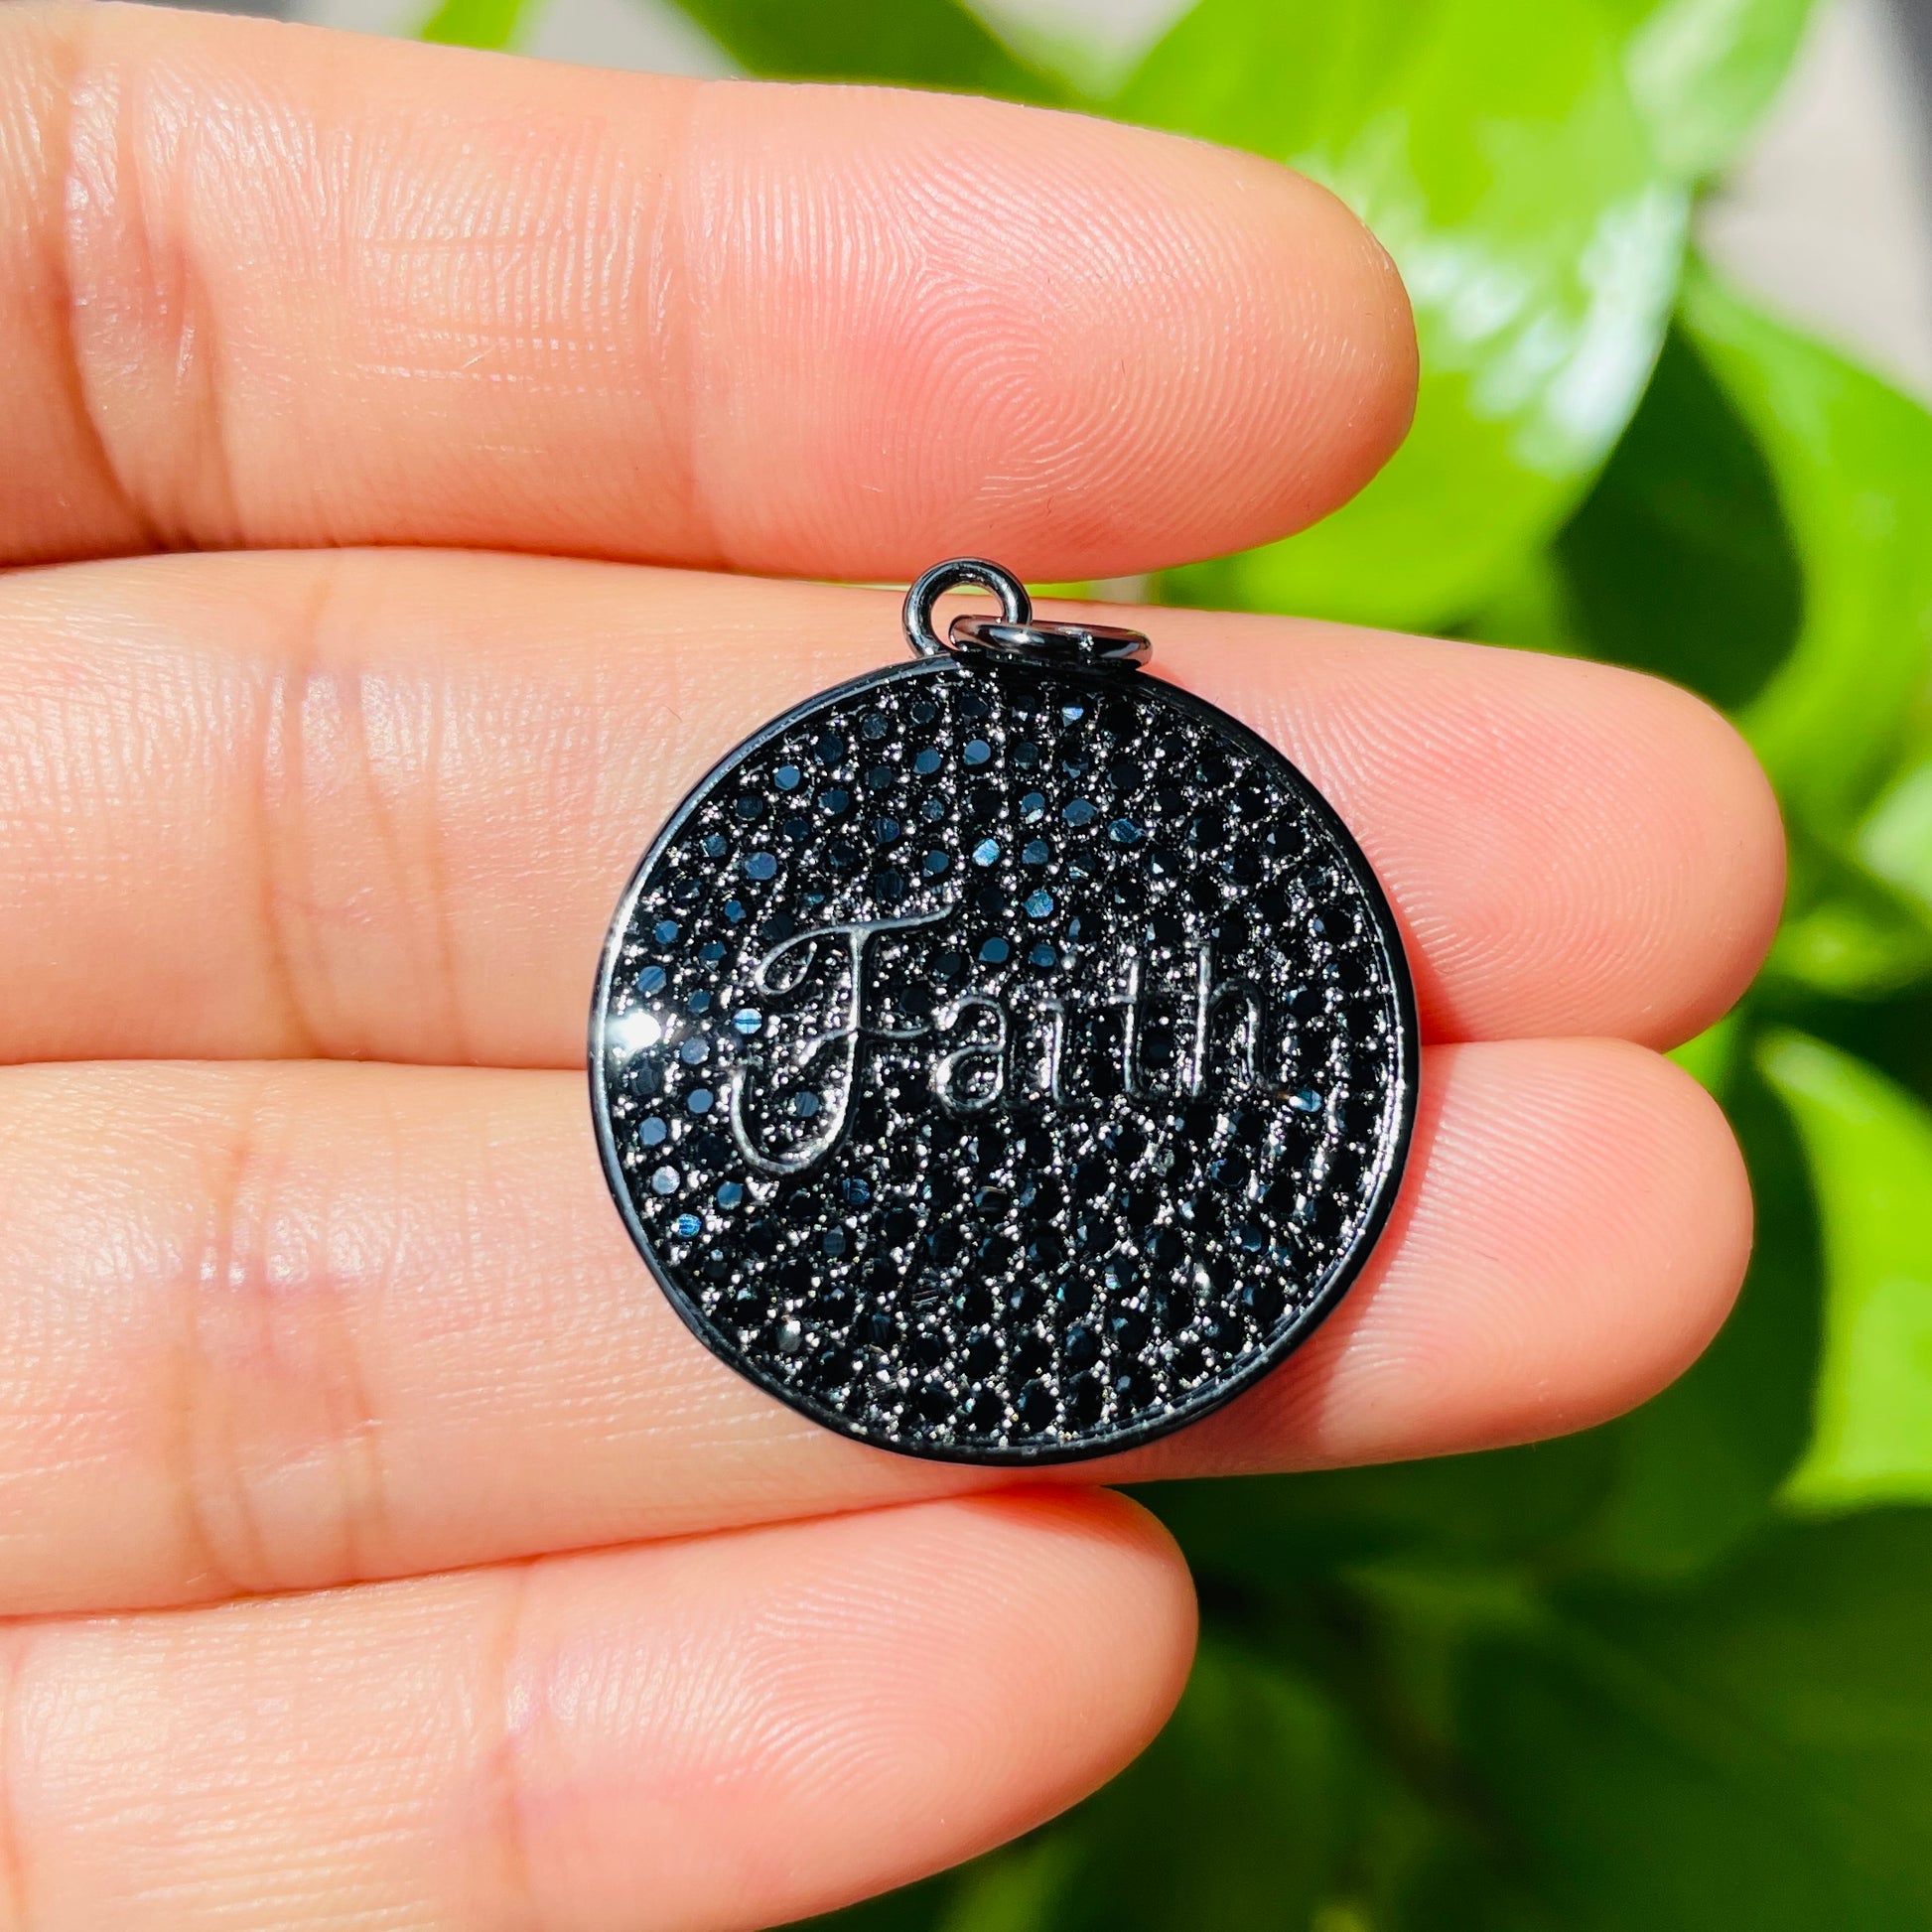 10pcs/lot 25mm CZ Pave Round Plate FAITH Quote Charms Black on Black CZ Paved Charms Christian Quotes Discs On Sale Charms Beads Beyond